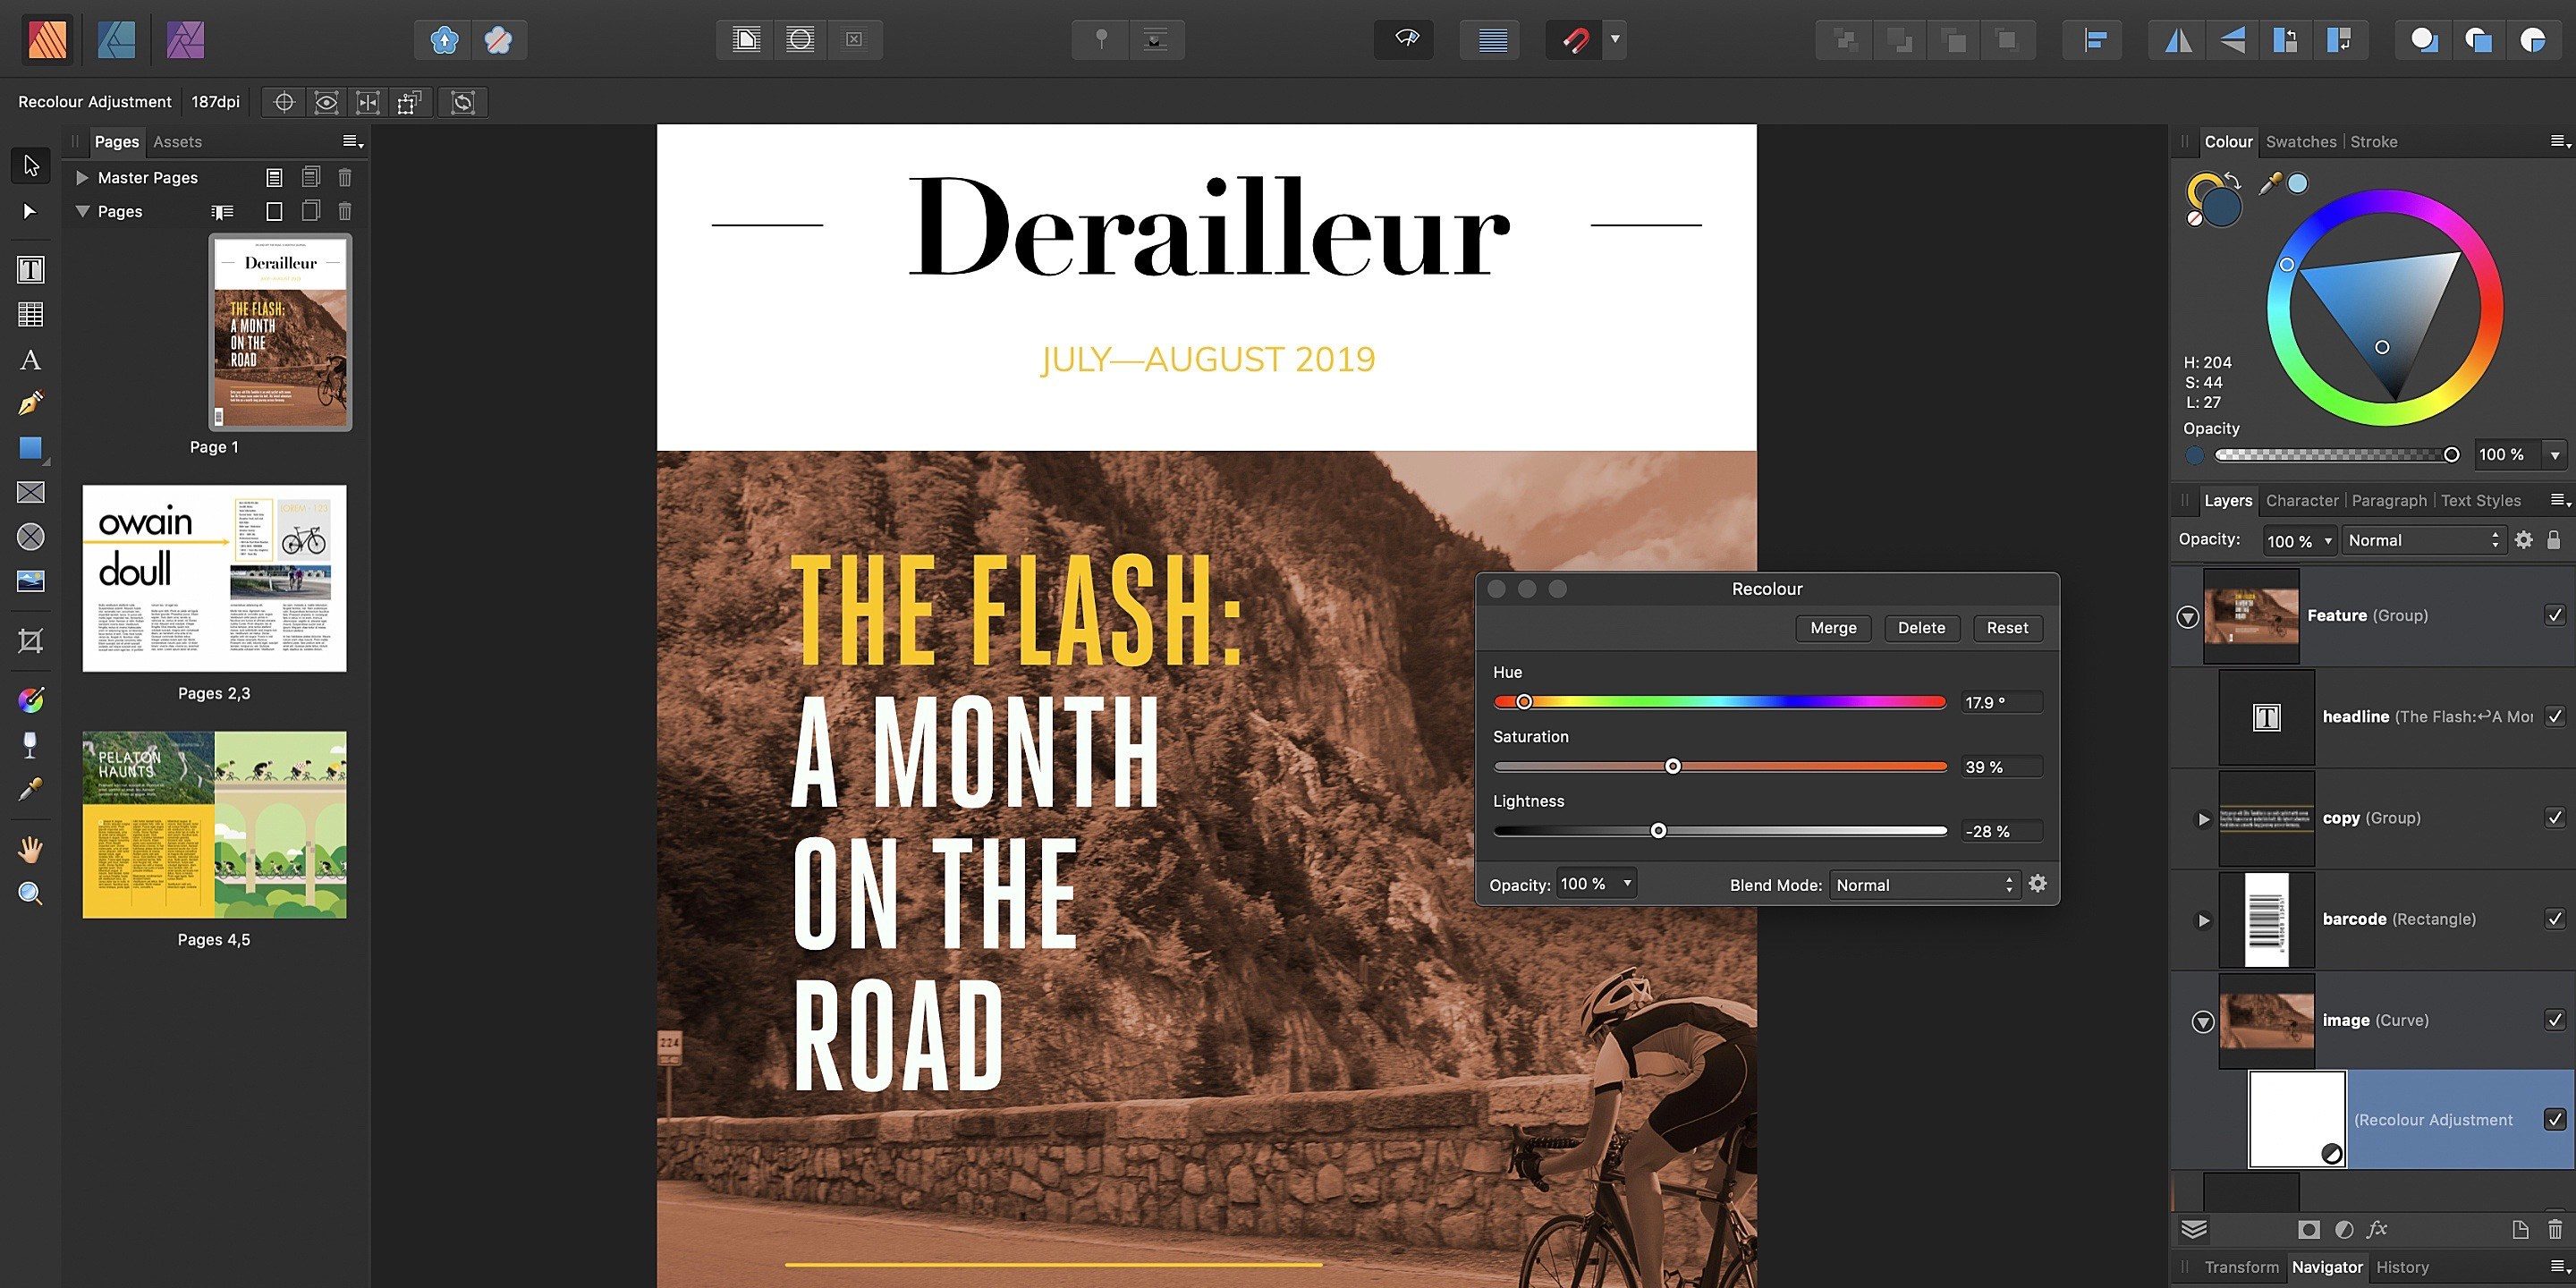 Serif Affinity Publisher 2.1.1.1847 instal the new version for iphone